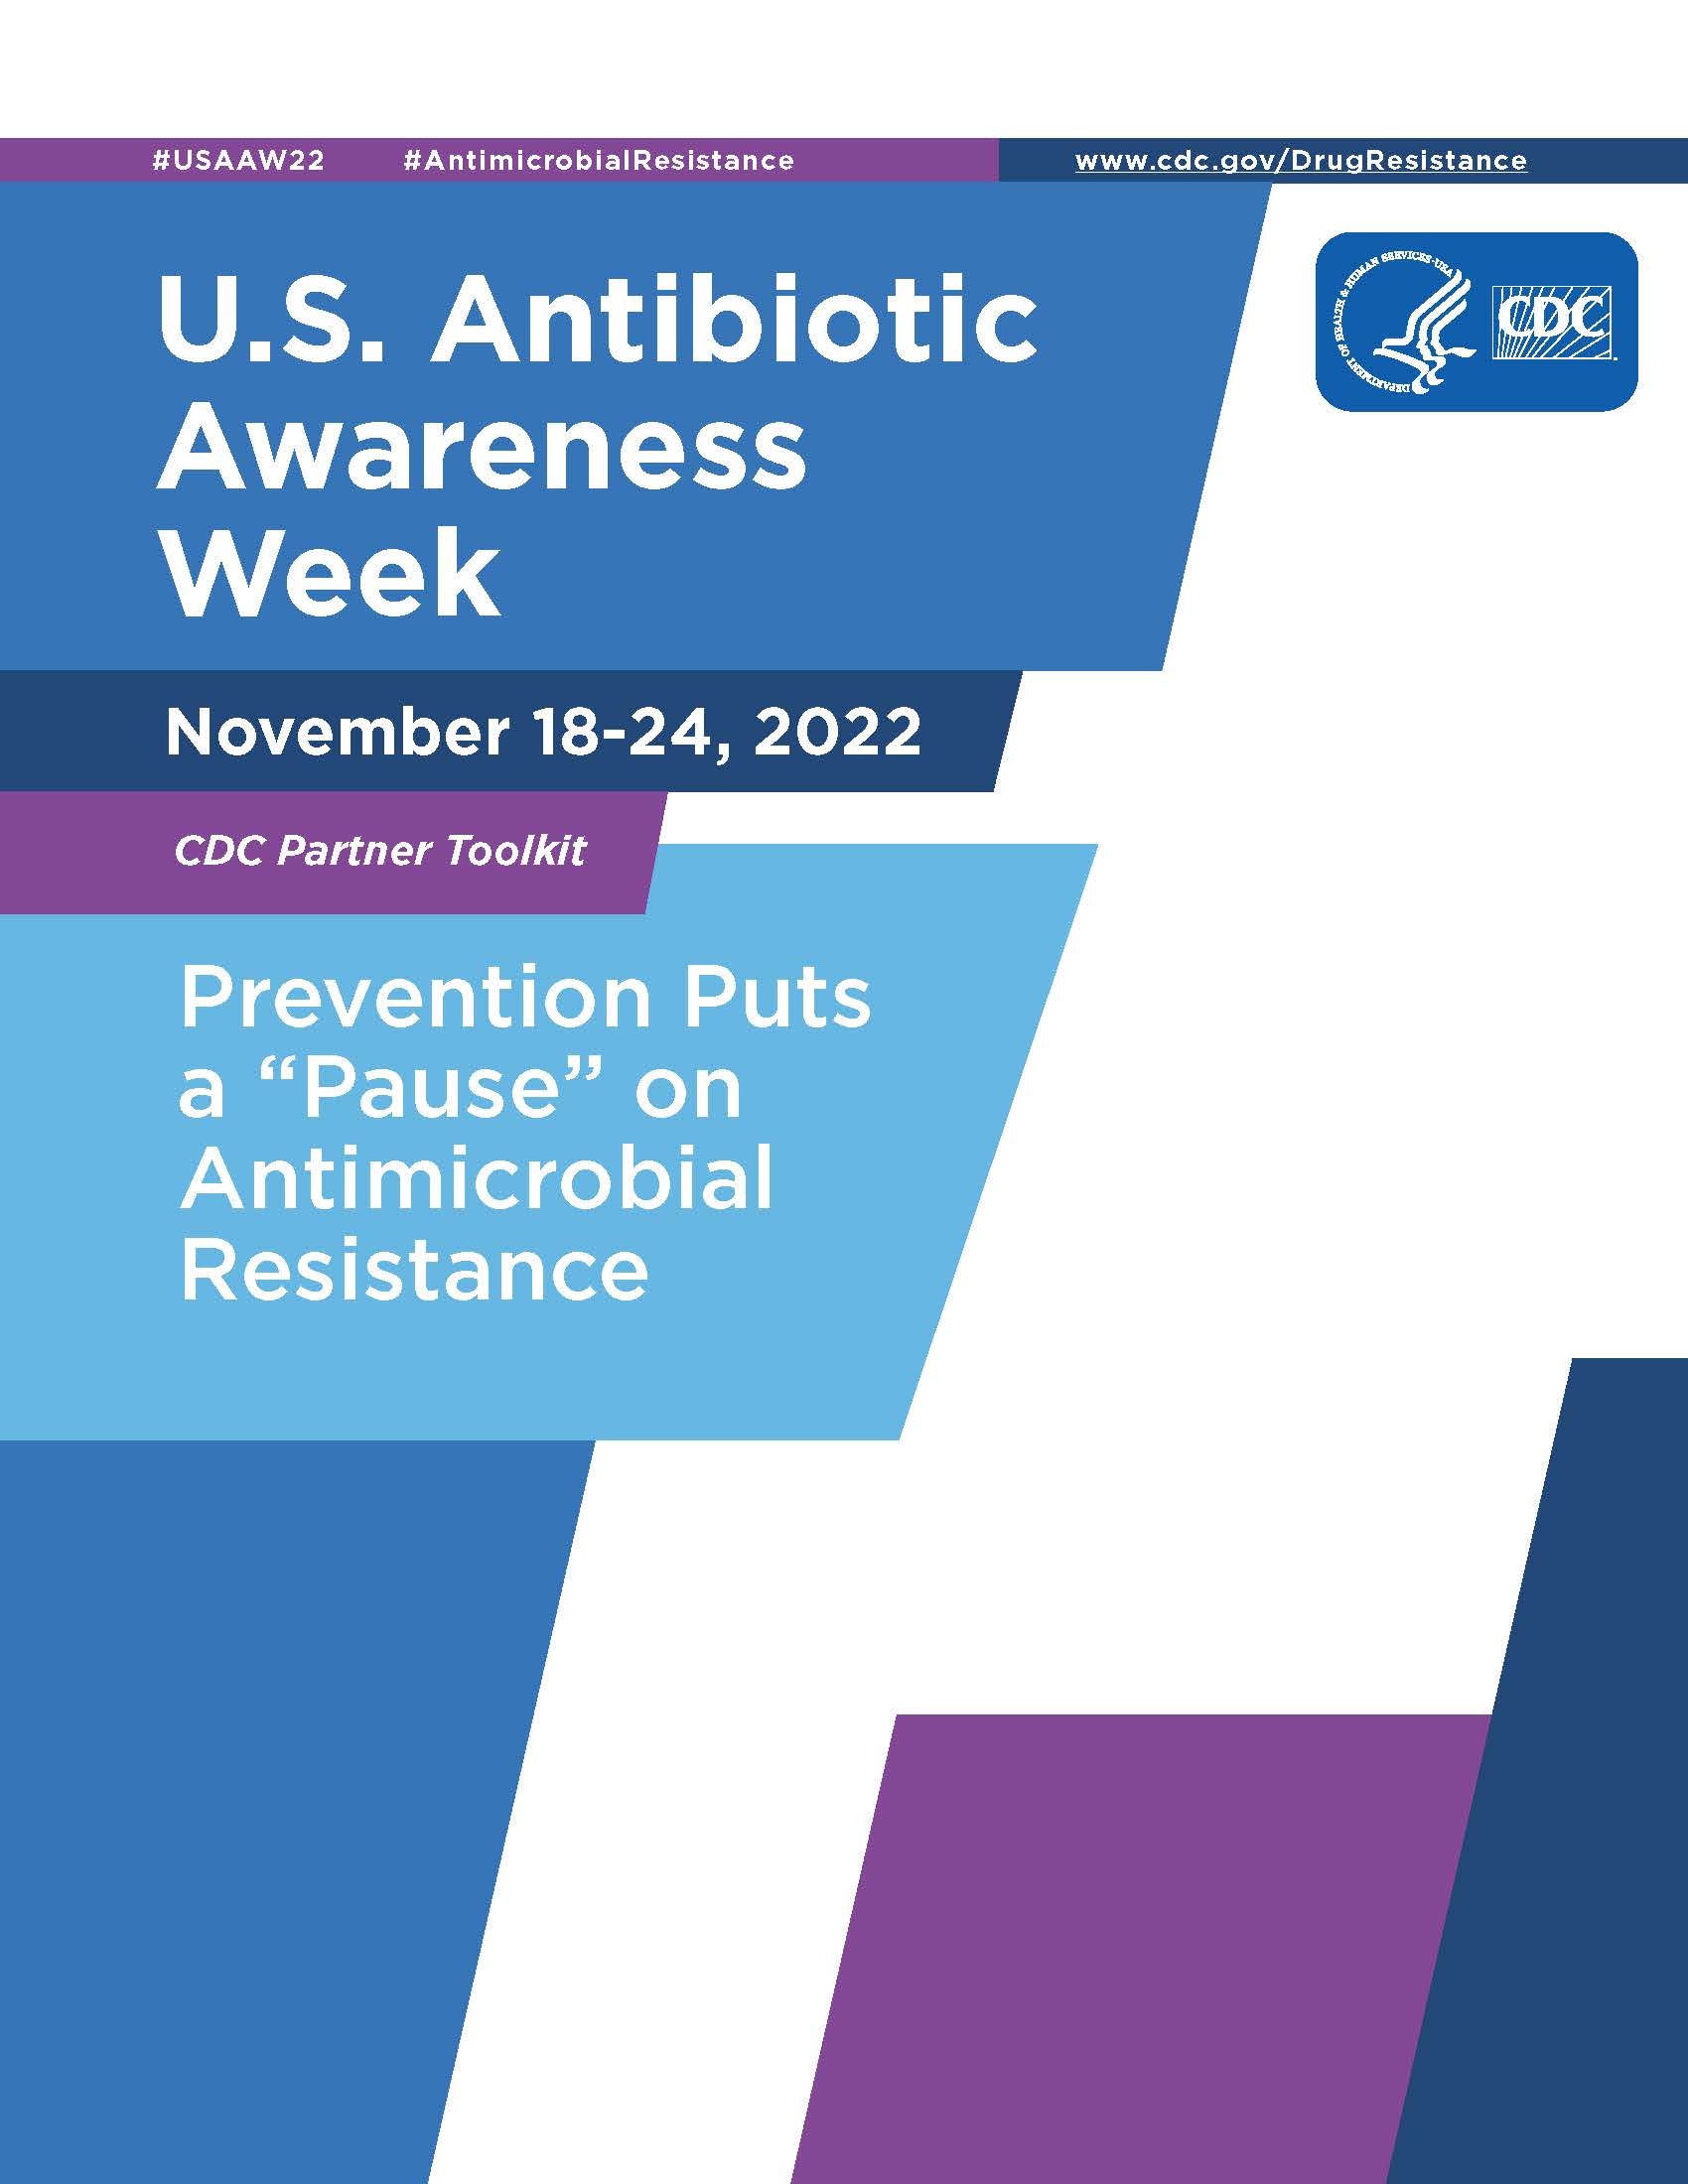 USAAW 2022 CDC Partner Toolkit Cover Image